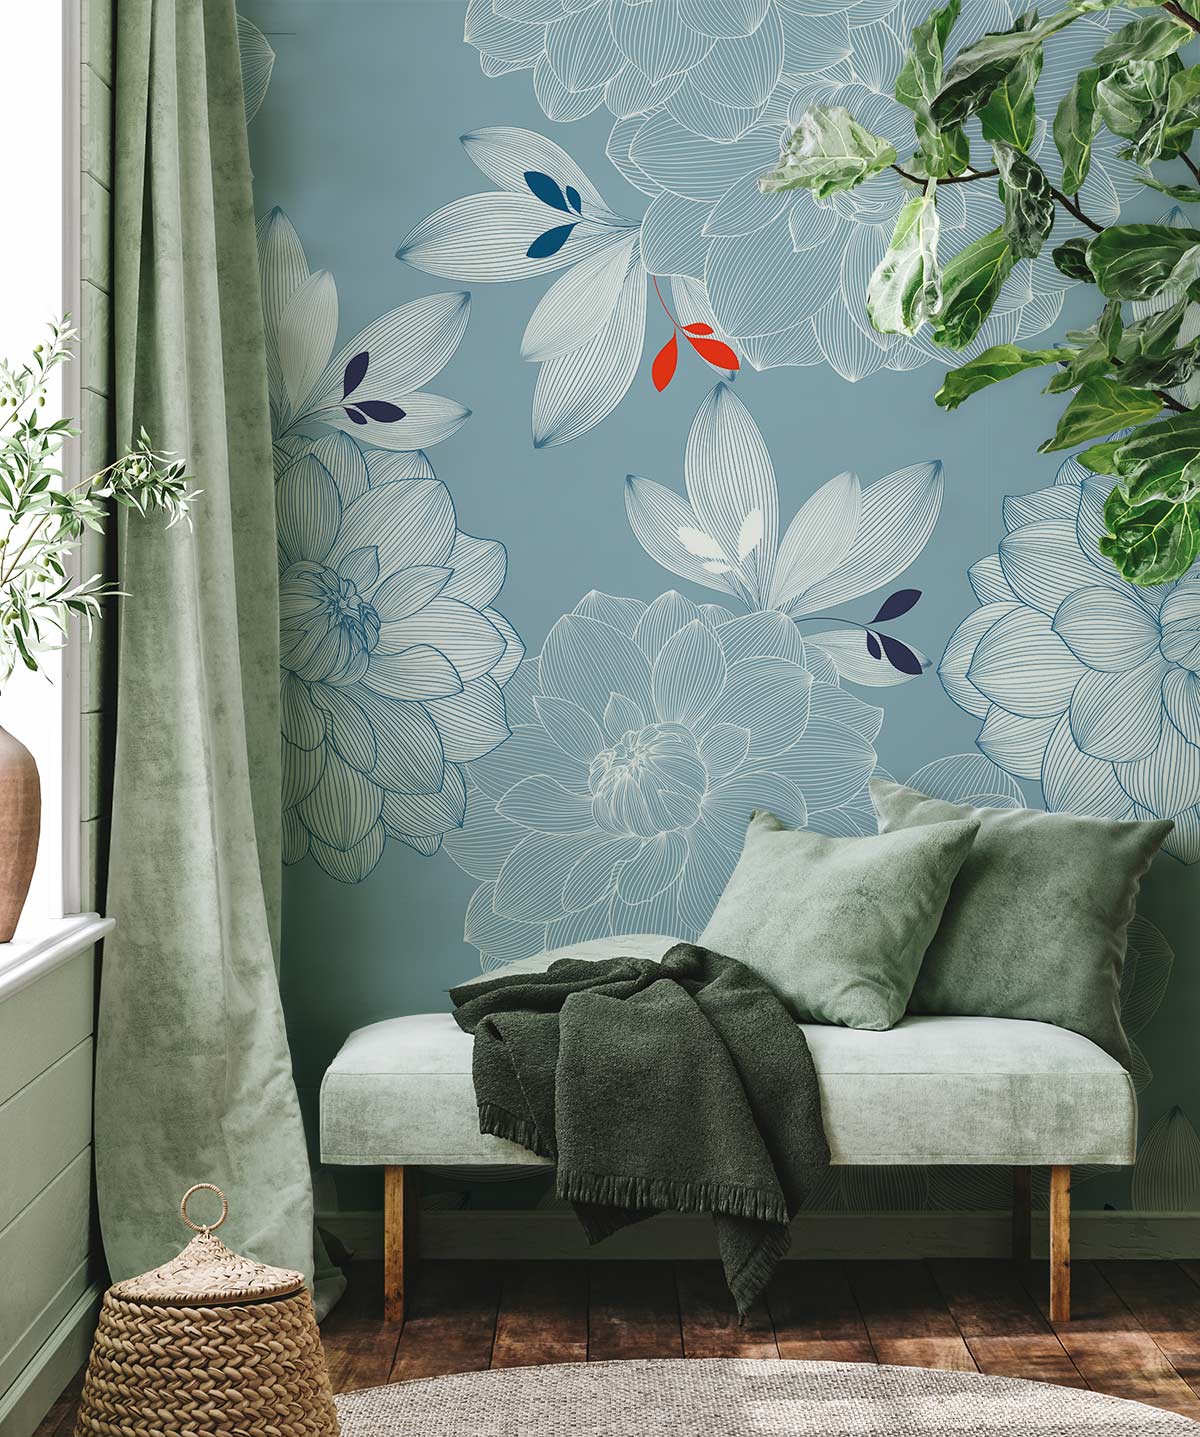 new inspiration for a navy and white flower wall mural